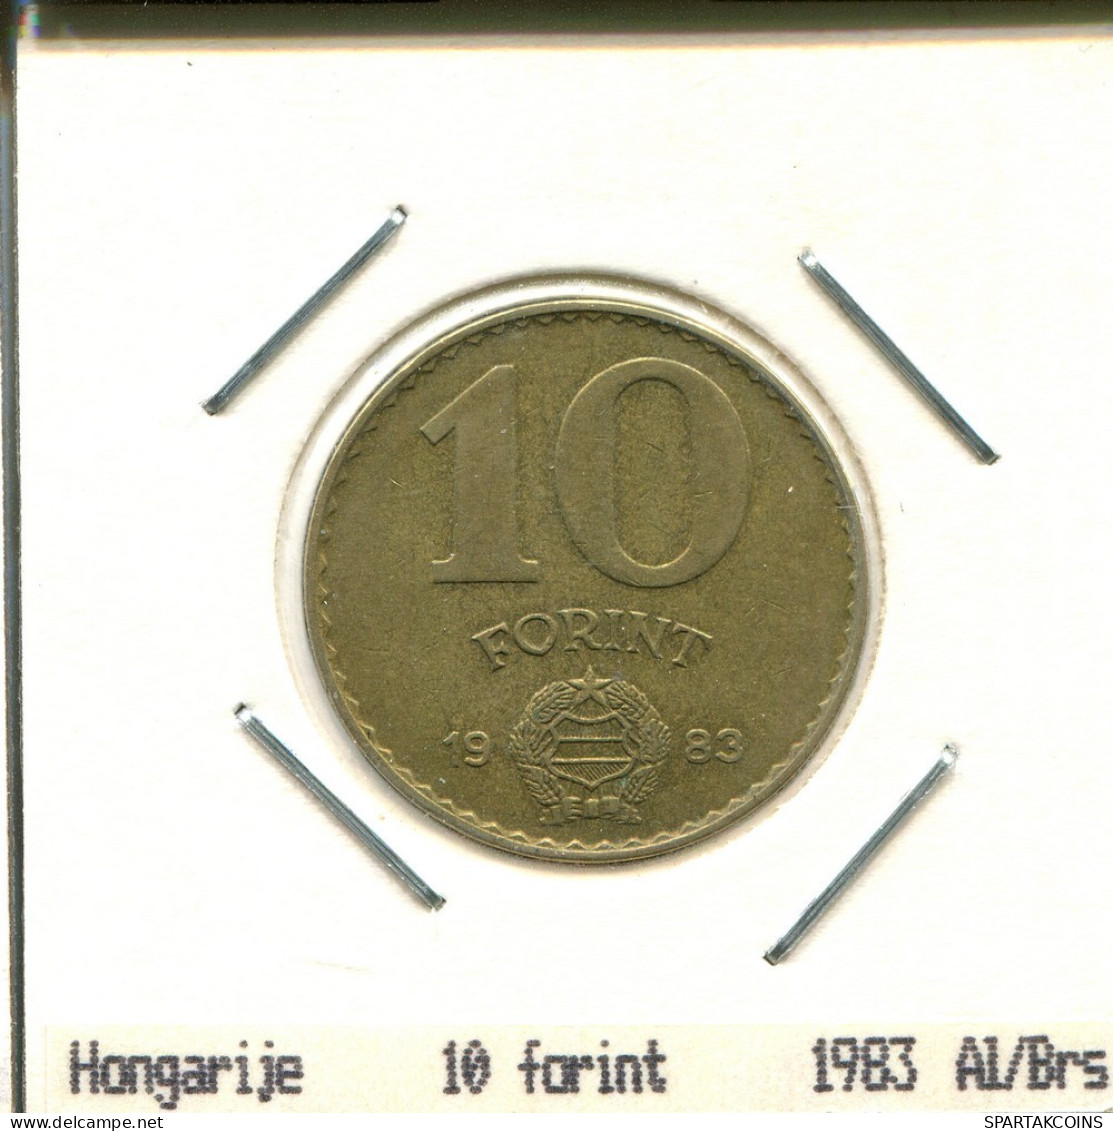 10 FORINT 1983 HUNGARY Coin #AS499.U.A - Ungheria